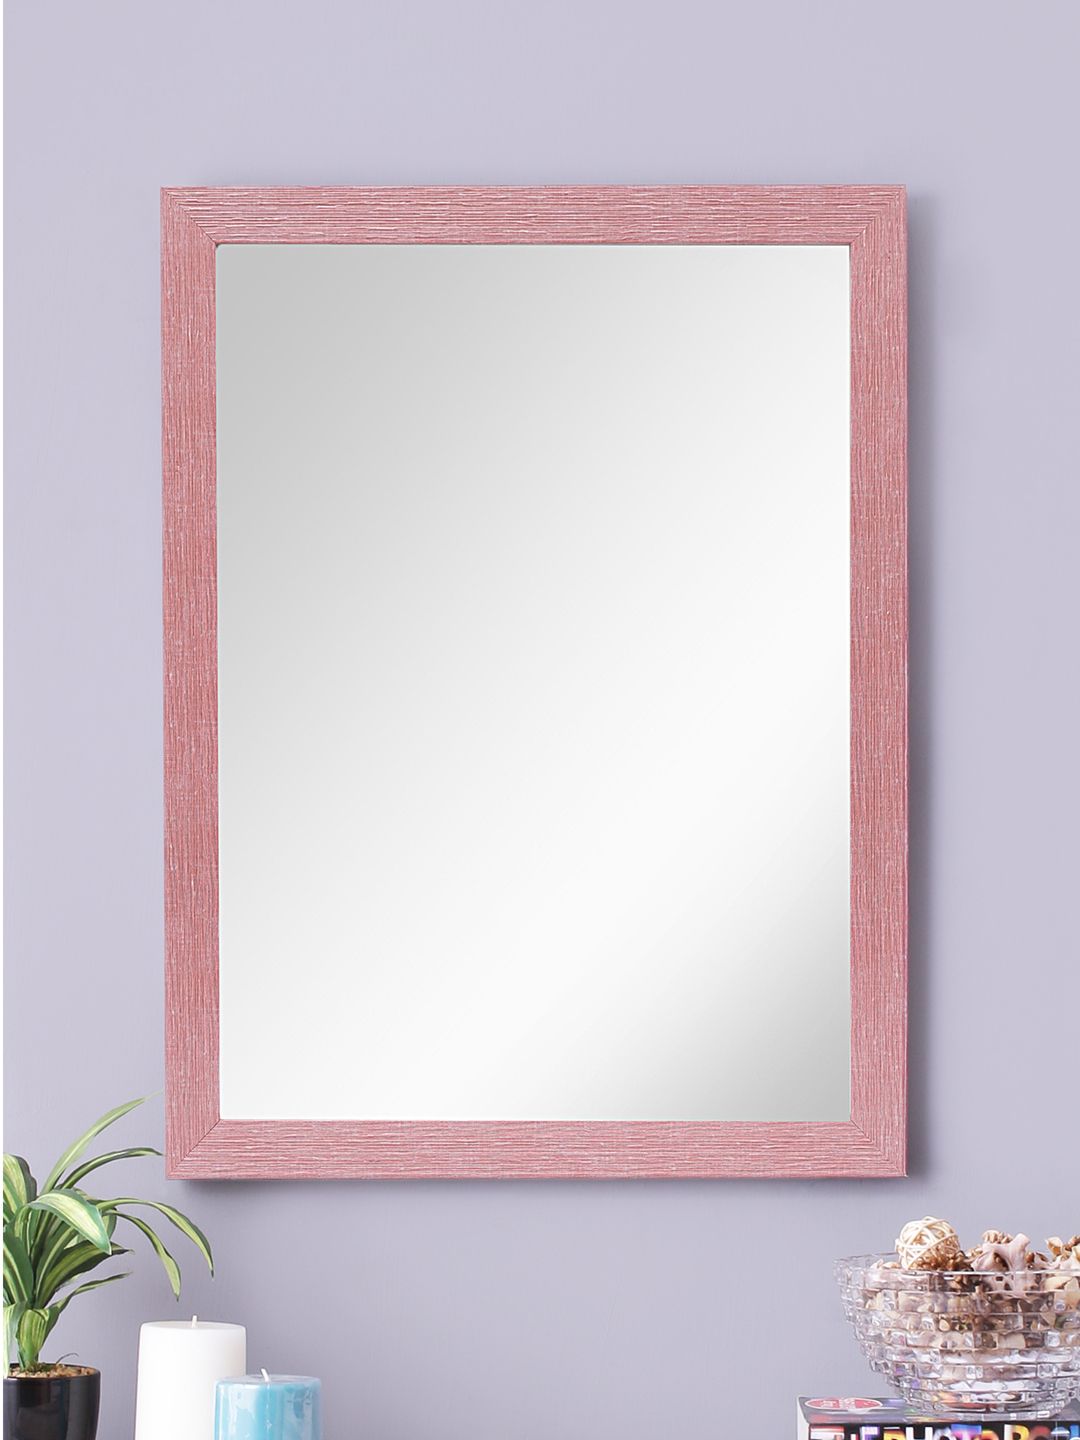 999Store Pink Fibre Framed Wall Mirror Price in India